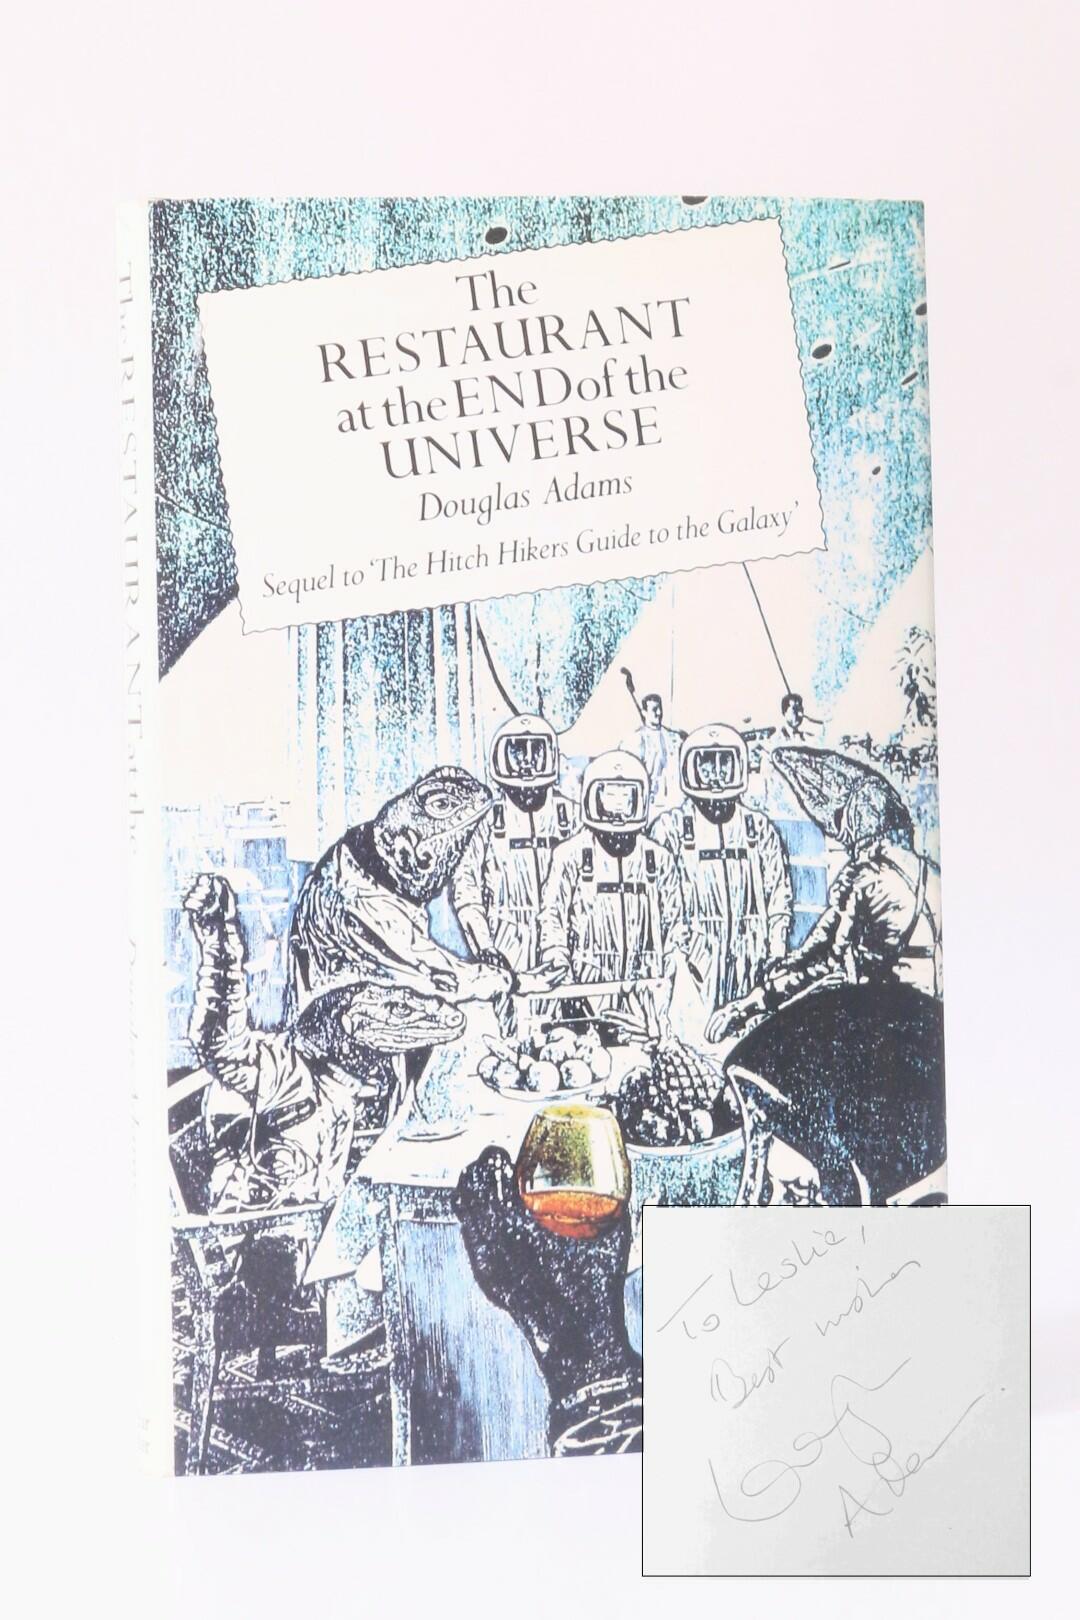 Douglas Adams - The Restaurant at the End of the Universe - Arthur Barker, 1980, First Edition.